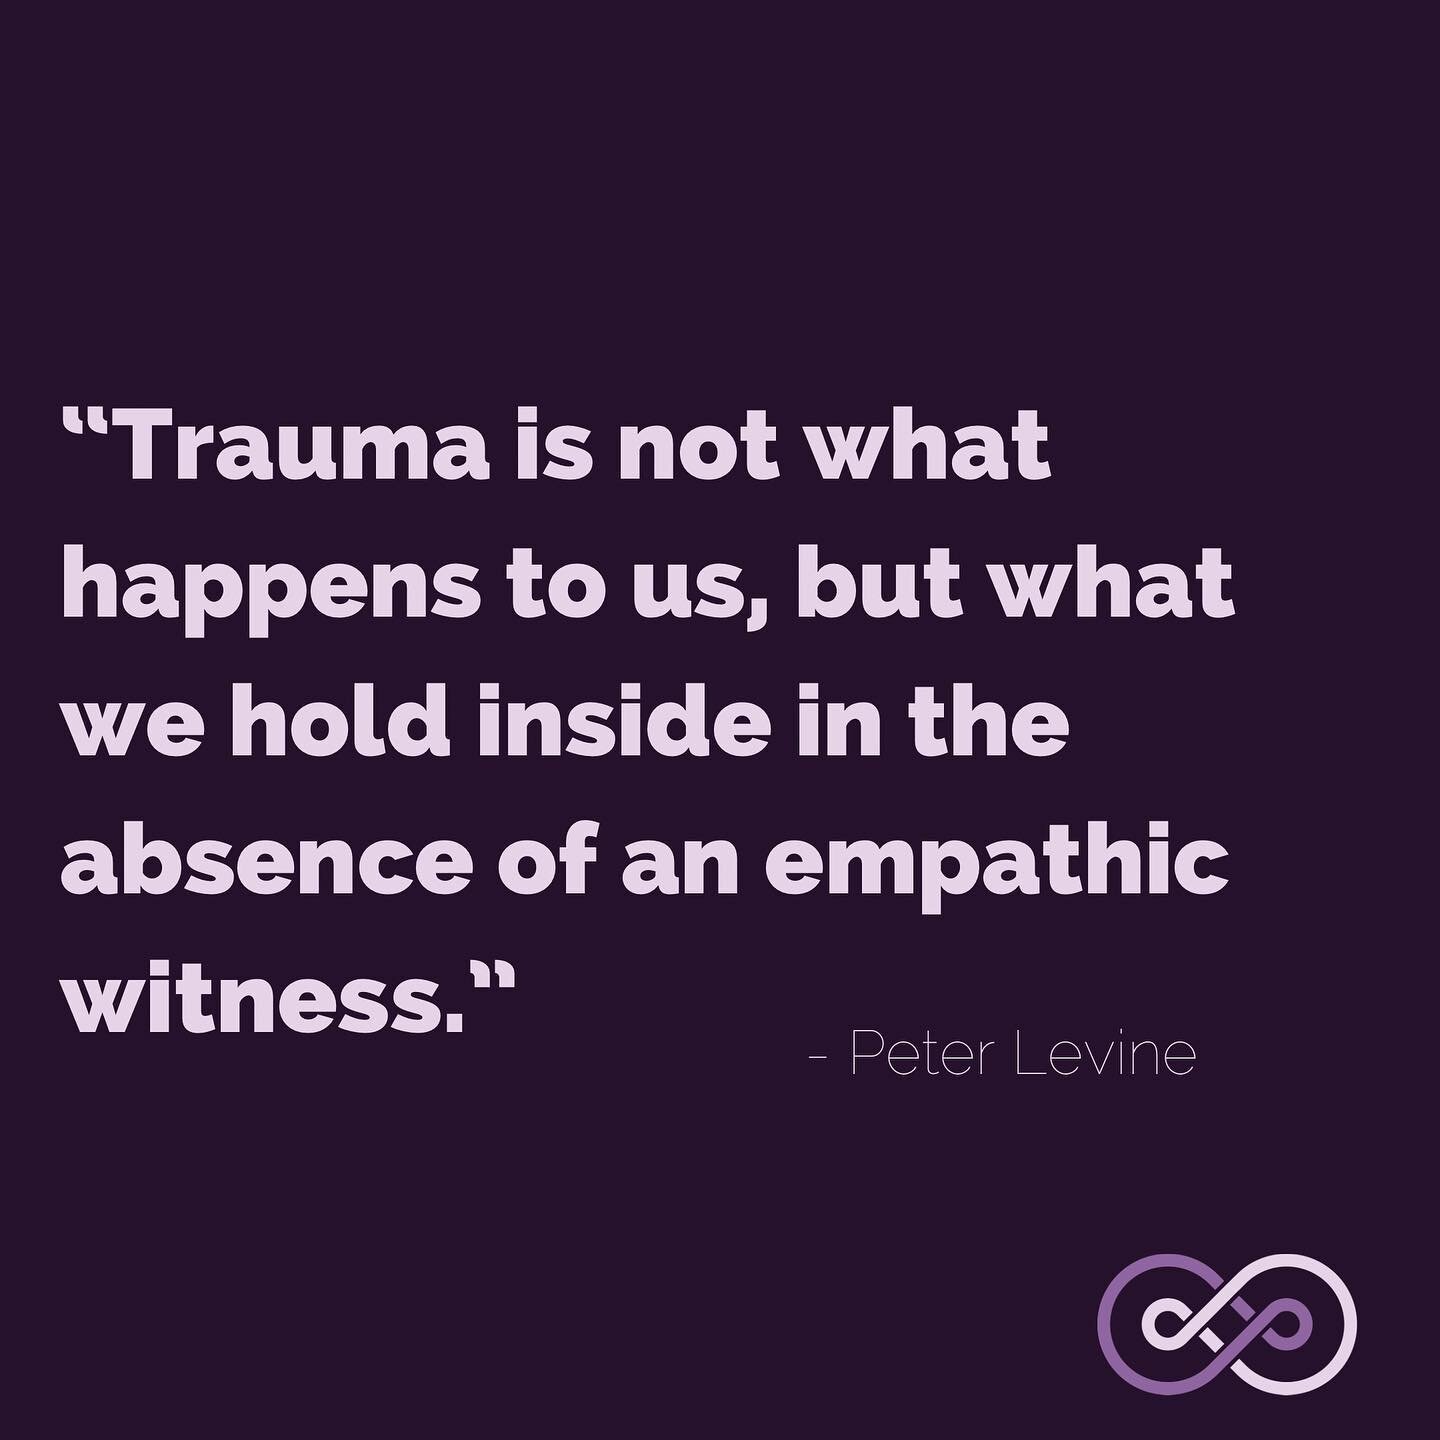 🌱
Finding and building quality support &amp; safety, both internal &amp; external, is essential to life.
We are social creatures &amp; we need each other. Our survival &amp; thriving depends on it.
💟
#relational #trauma #peterlevine #gestalttherapy